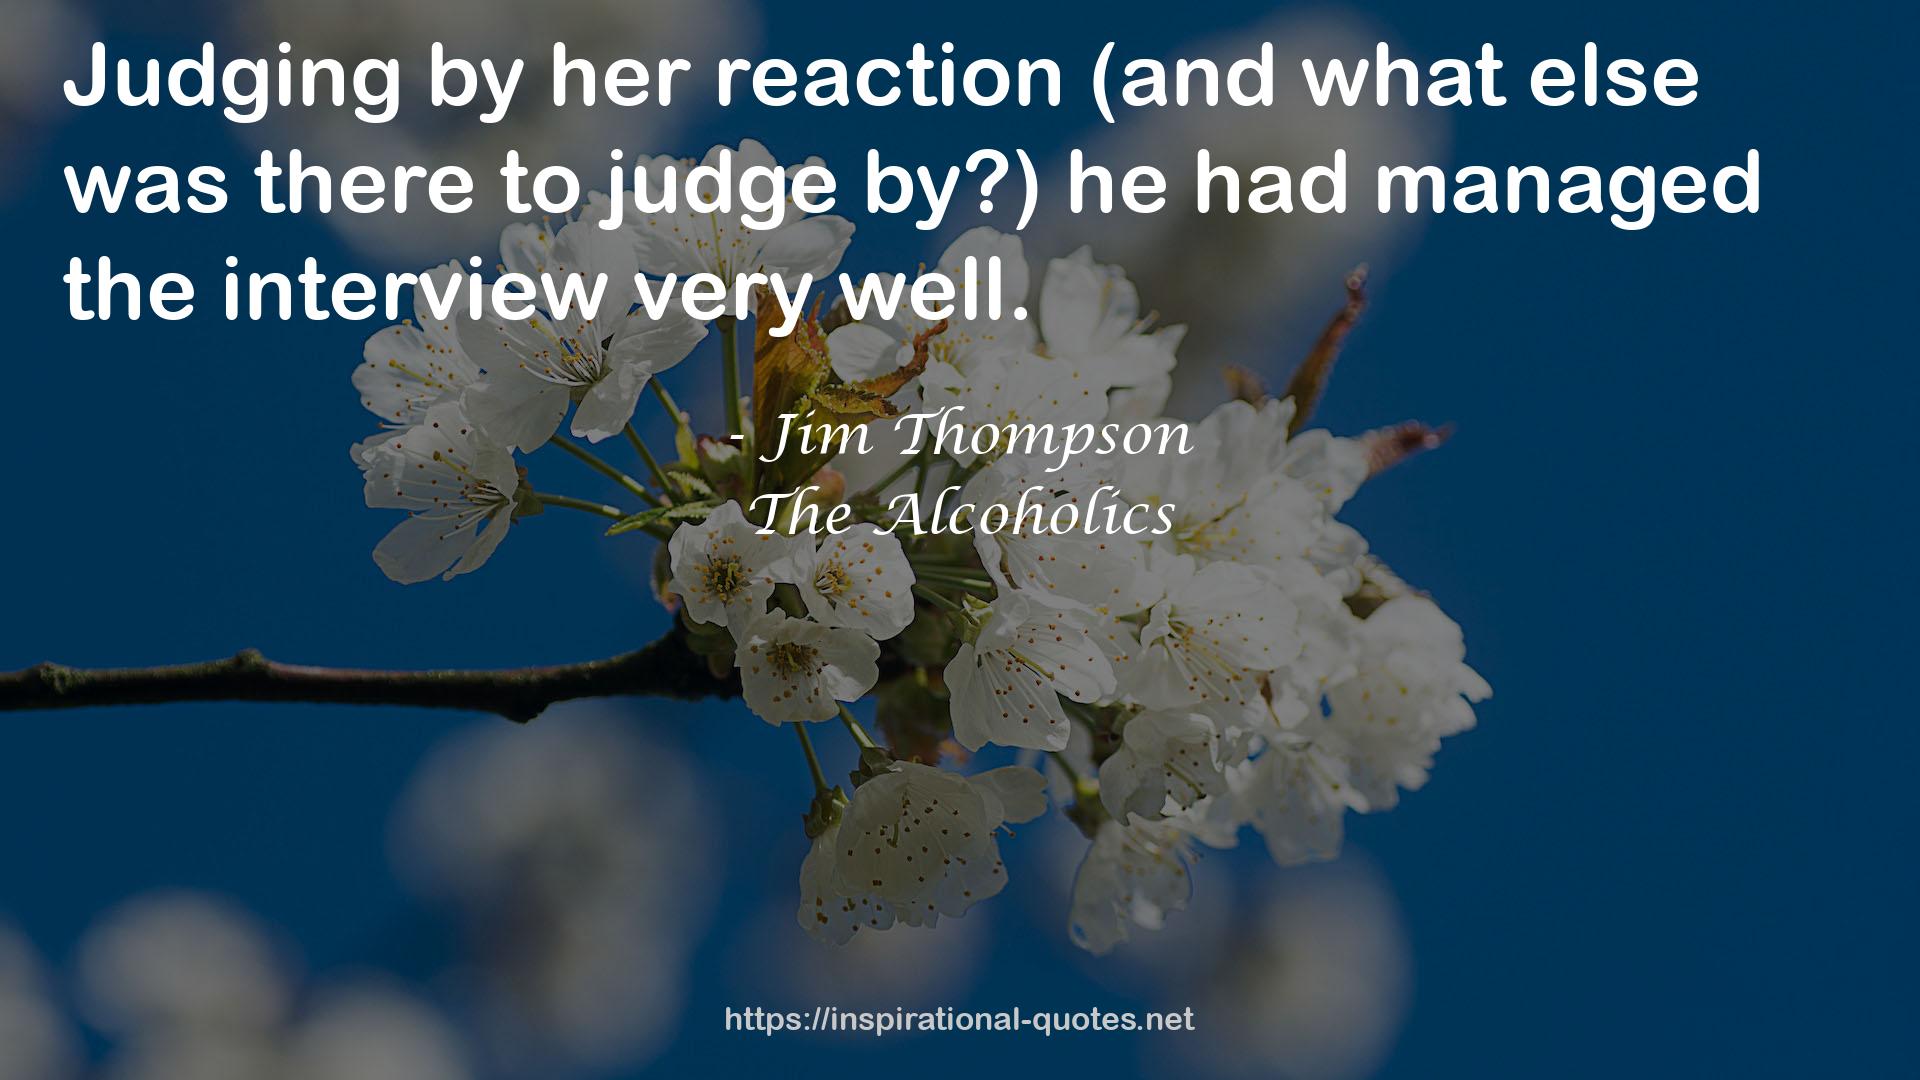 The Alcoholics QUOTES